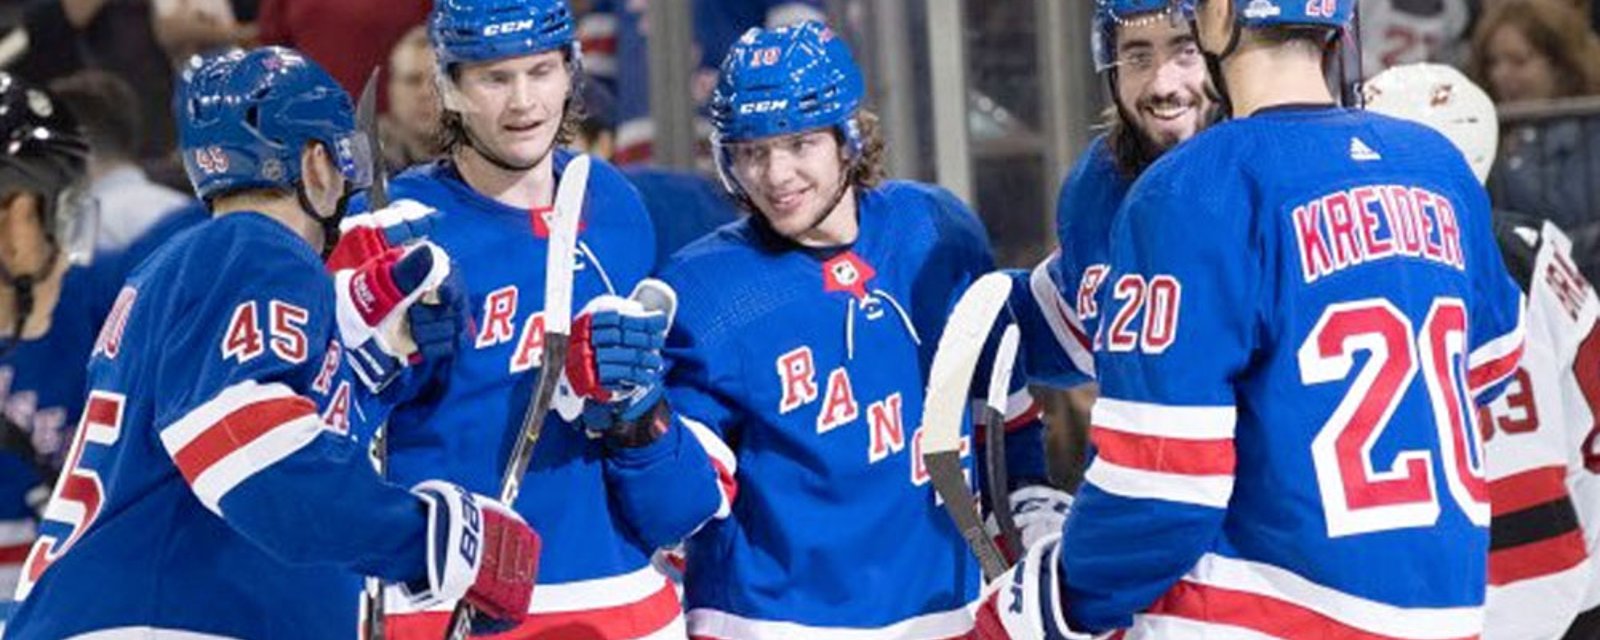 Panarin wires home his first goal as a Ranger